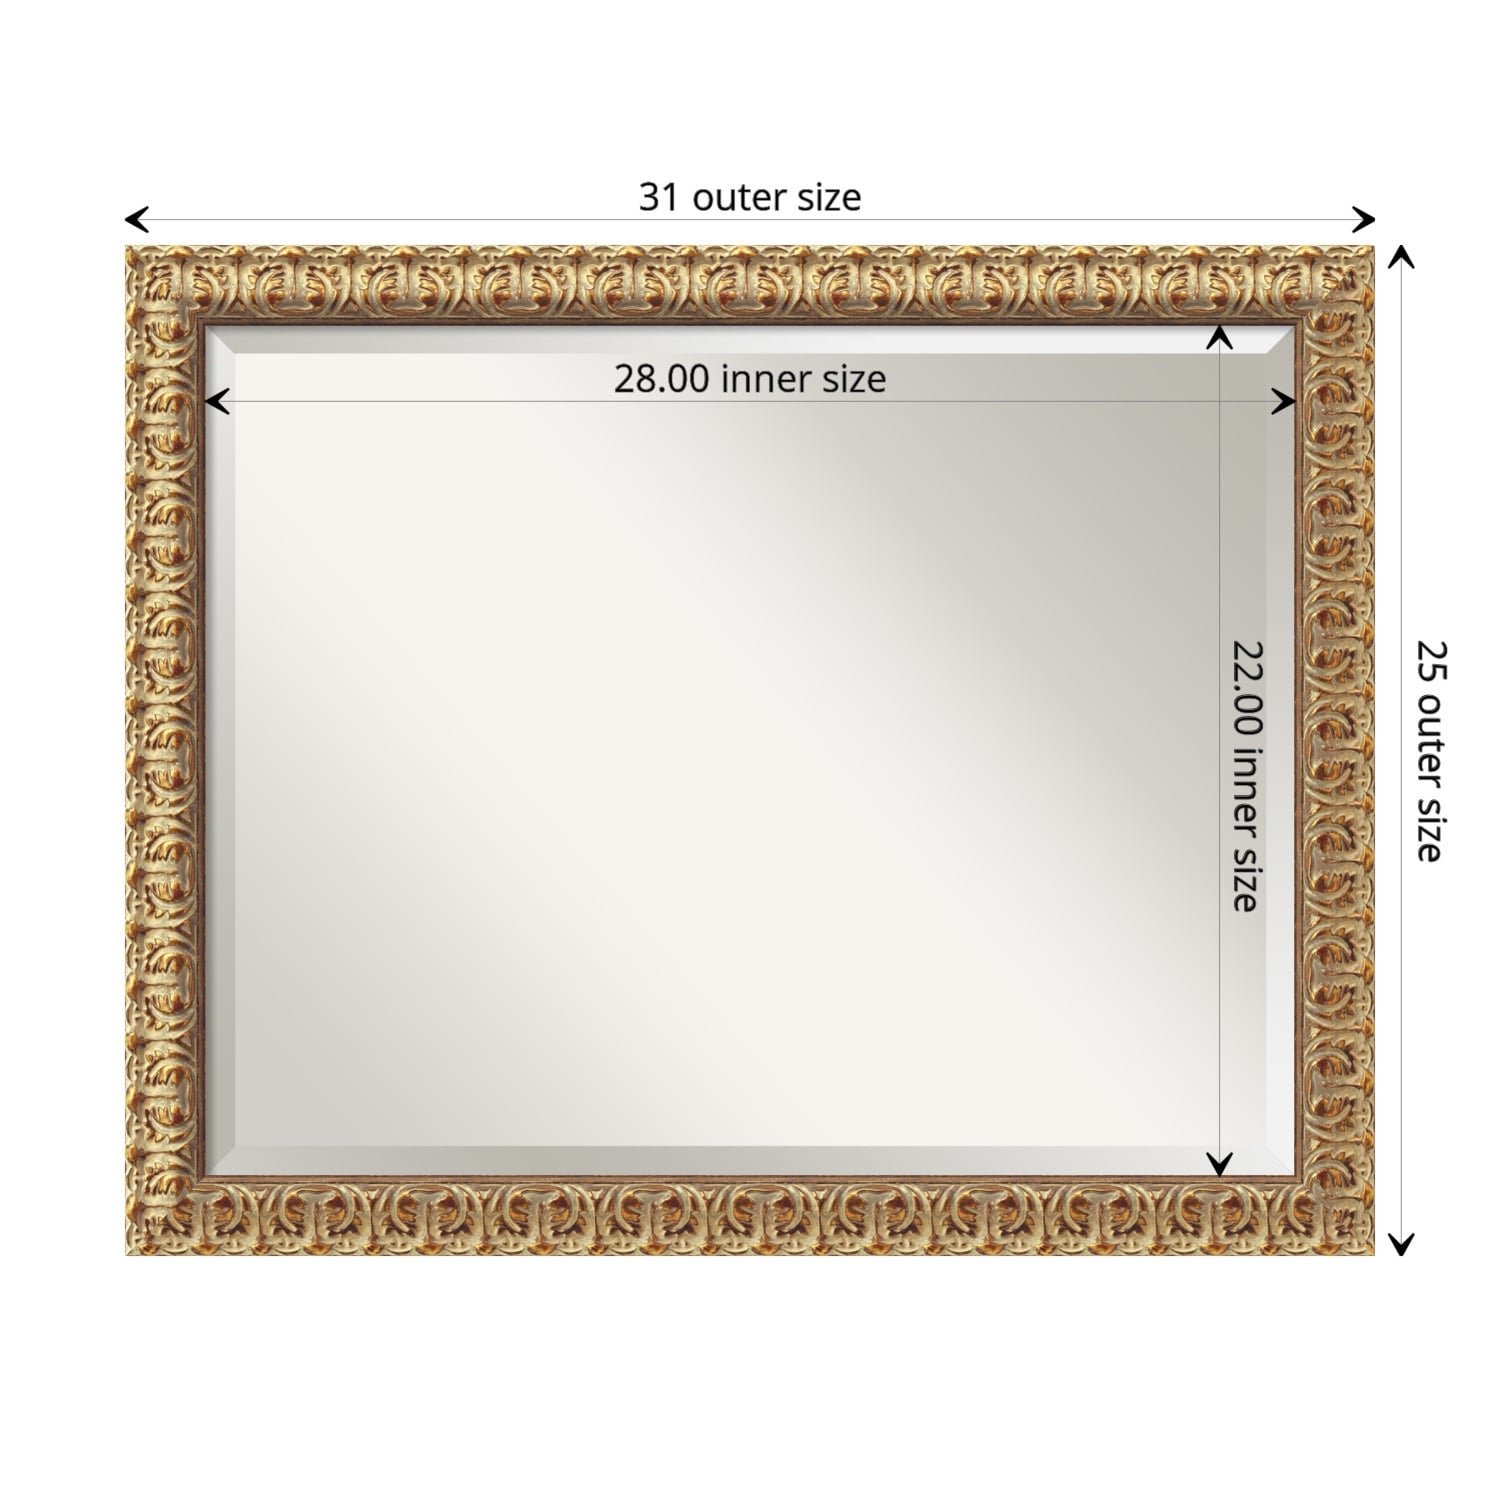 Florentine Gold Wall Mirror - 31.5W x 25.5H in. - image 4 of 5